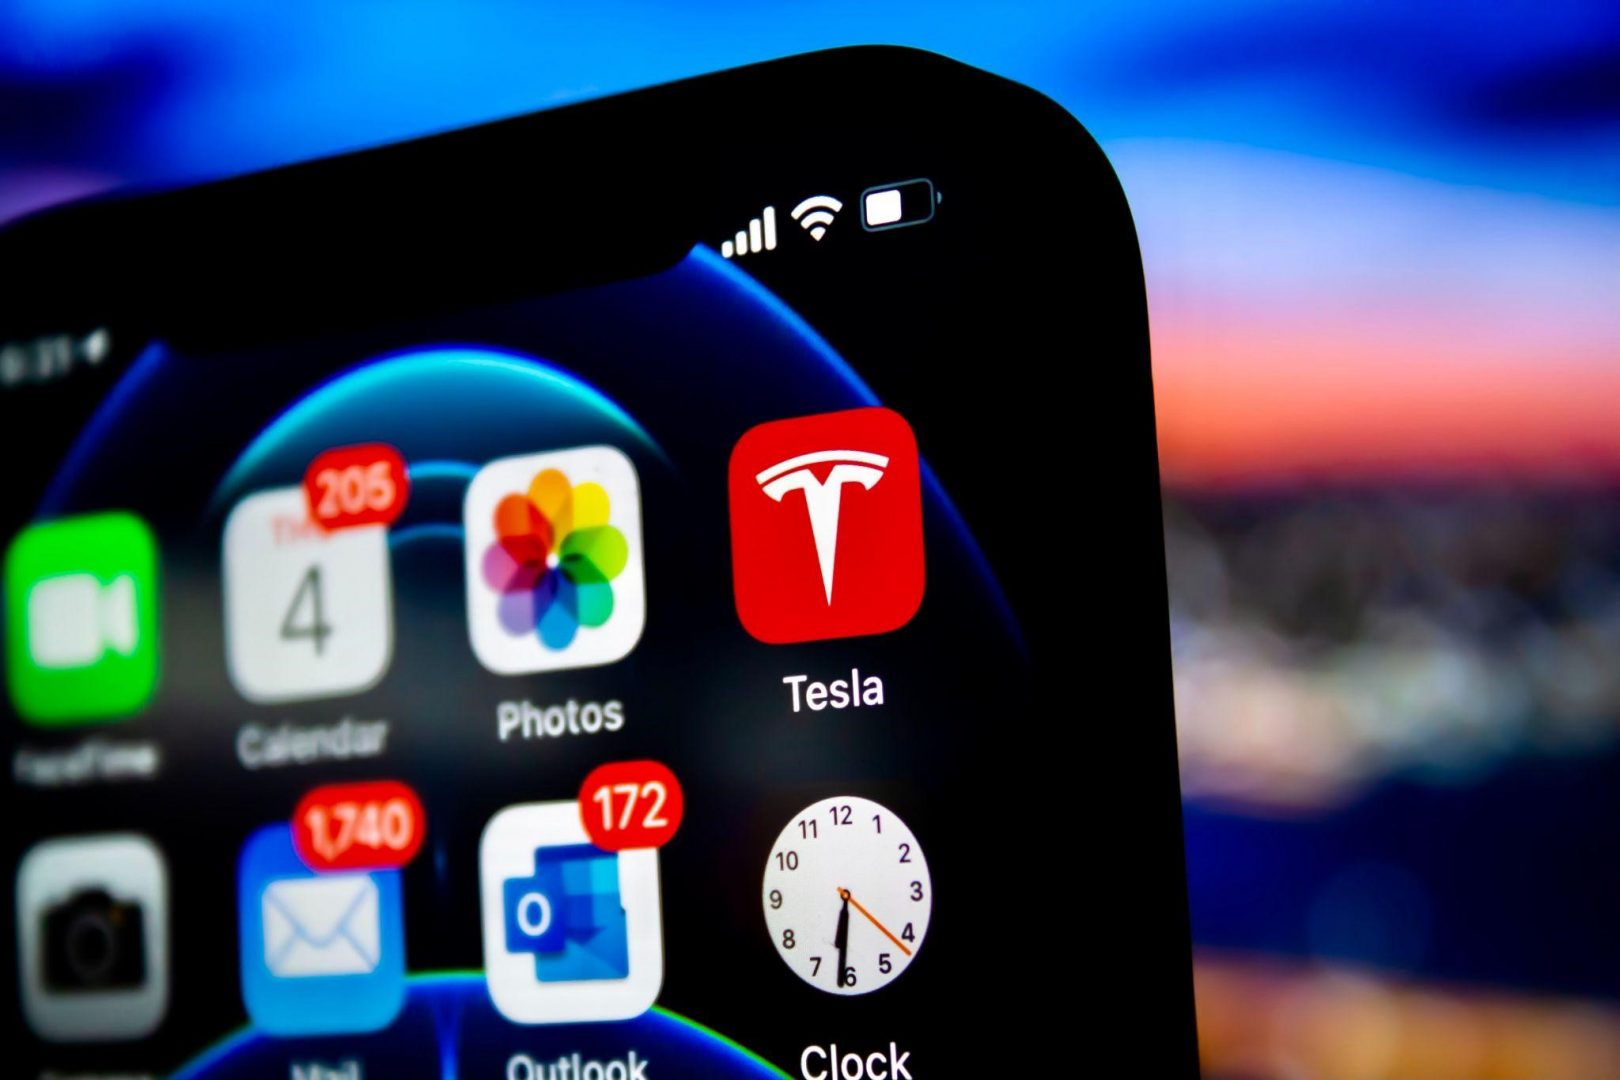 Features of the Tesla Model Pi (5G) Smartphone Phone